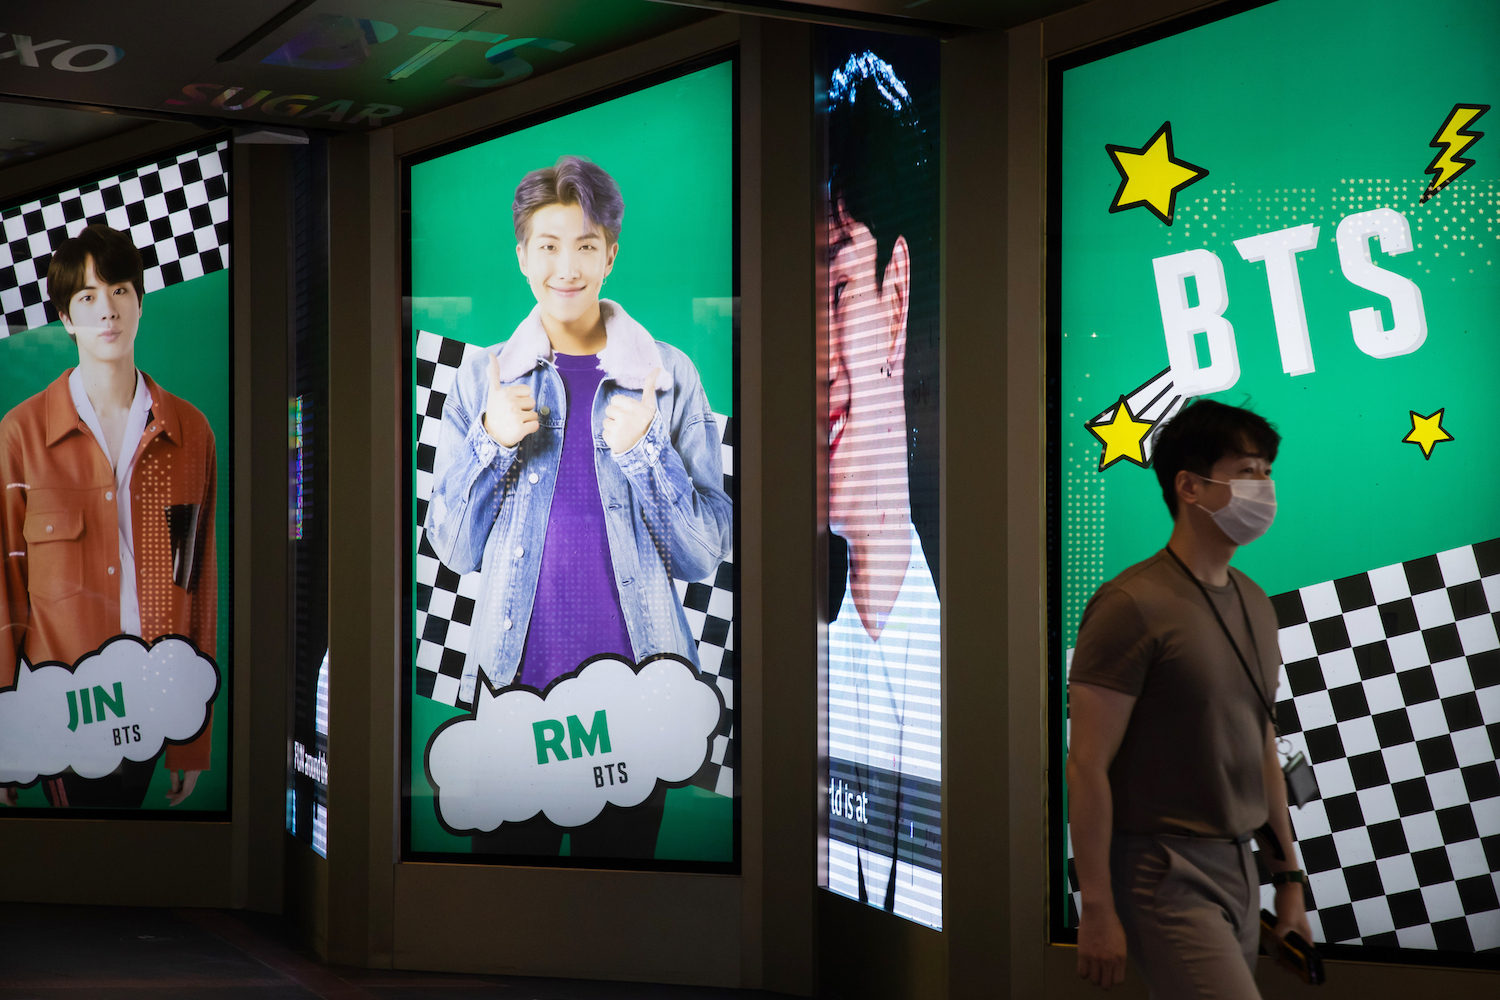 An advertisement for K-pop boy band BTS displayed in Seoul, South Korea